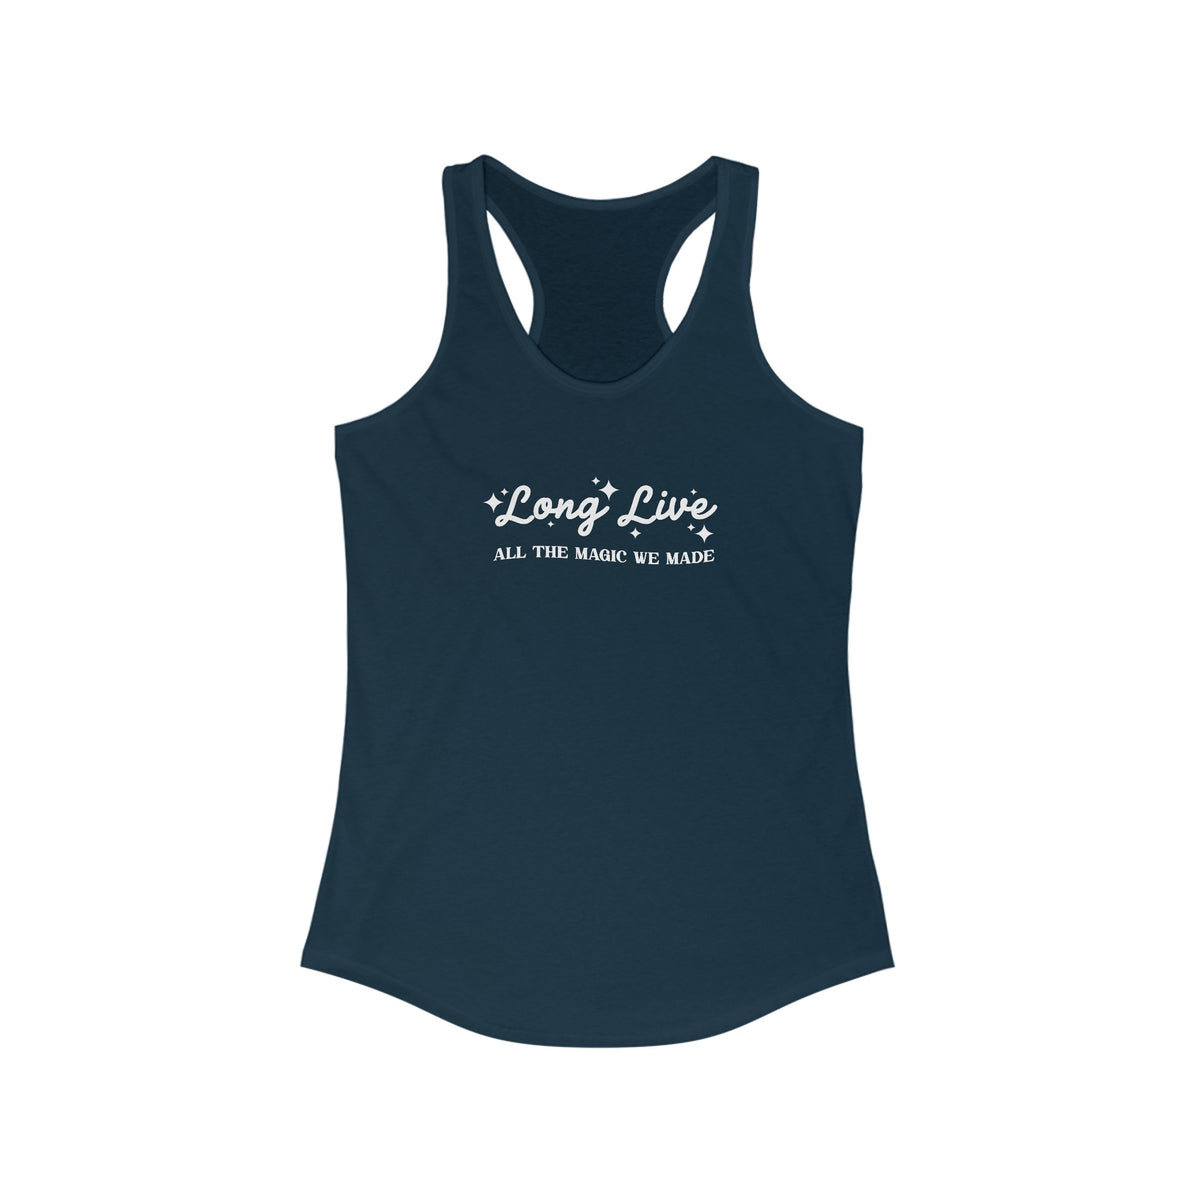 Long Live All The Magic We Made Women's Next Level Ideal Racerback Tank